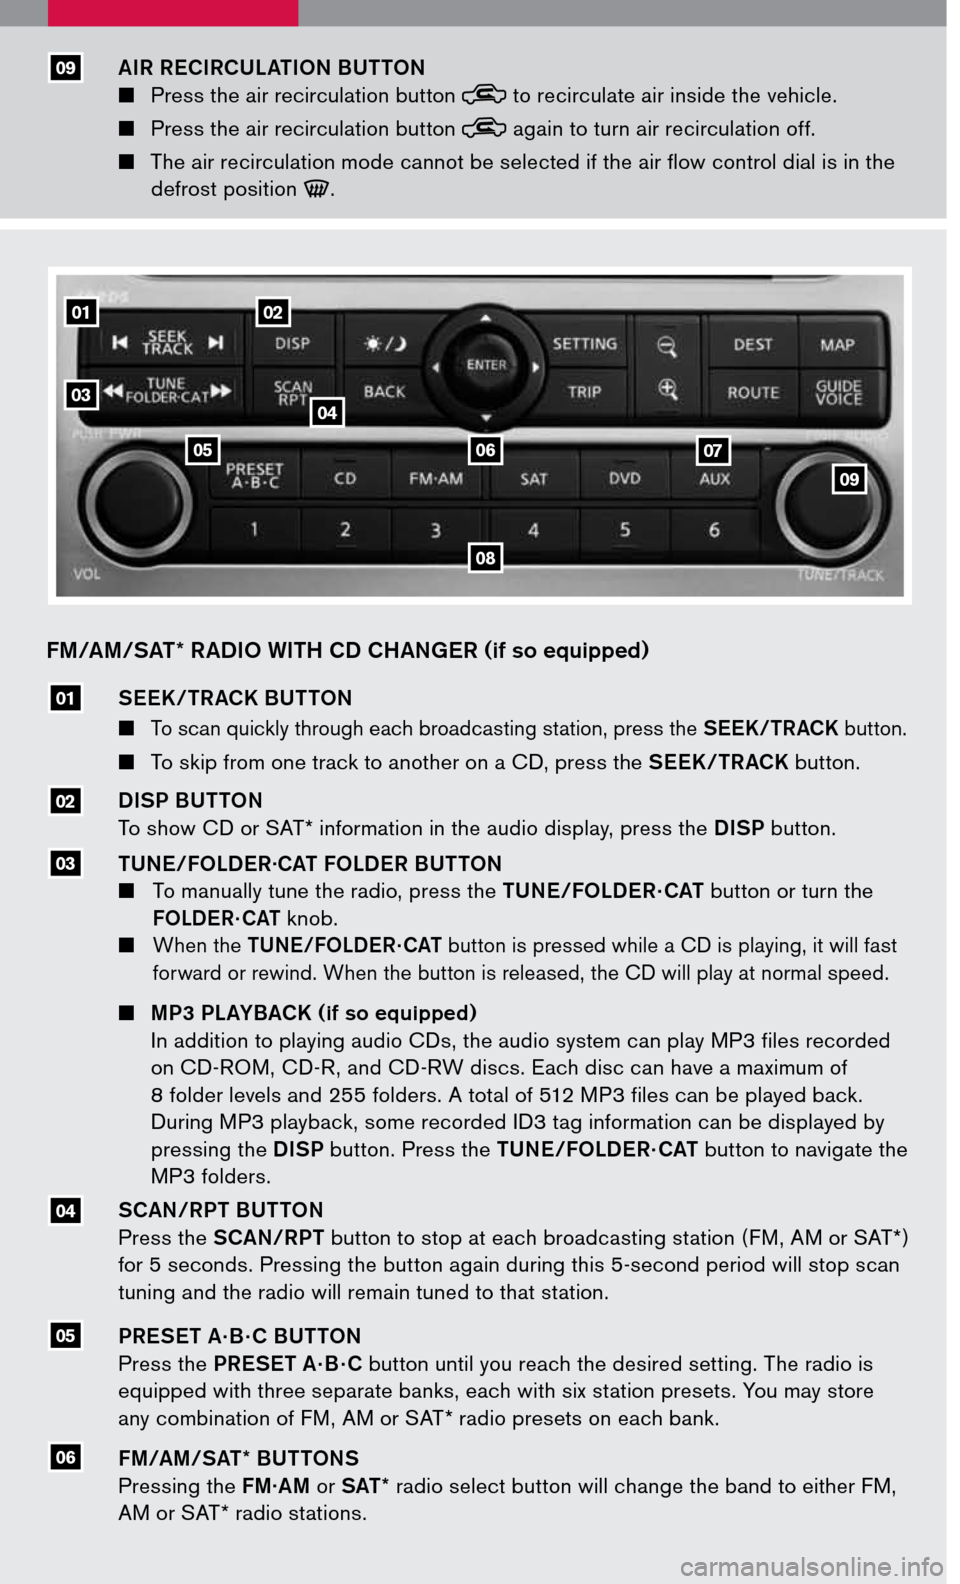 NISSAN PATHFINDER 2007 R51 / 3.G Quick Reference Guide 
0201
09
07
0403
05
FM/AM/SAT* RADIO WITH CD CHANGER (if so equipped)
SEEK /TRACK BUTTON
  To scan quickly through each broadcasting station, press the SEEK/TRACK button. 
   To skip from one tr